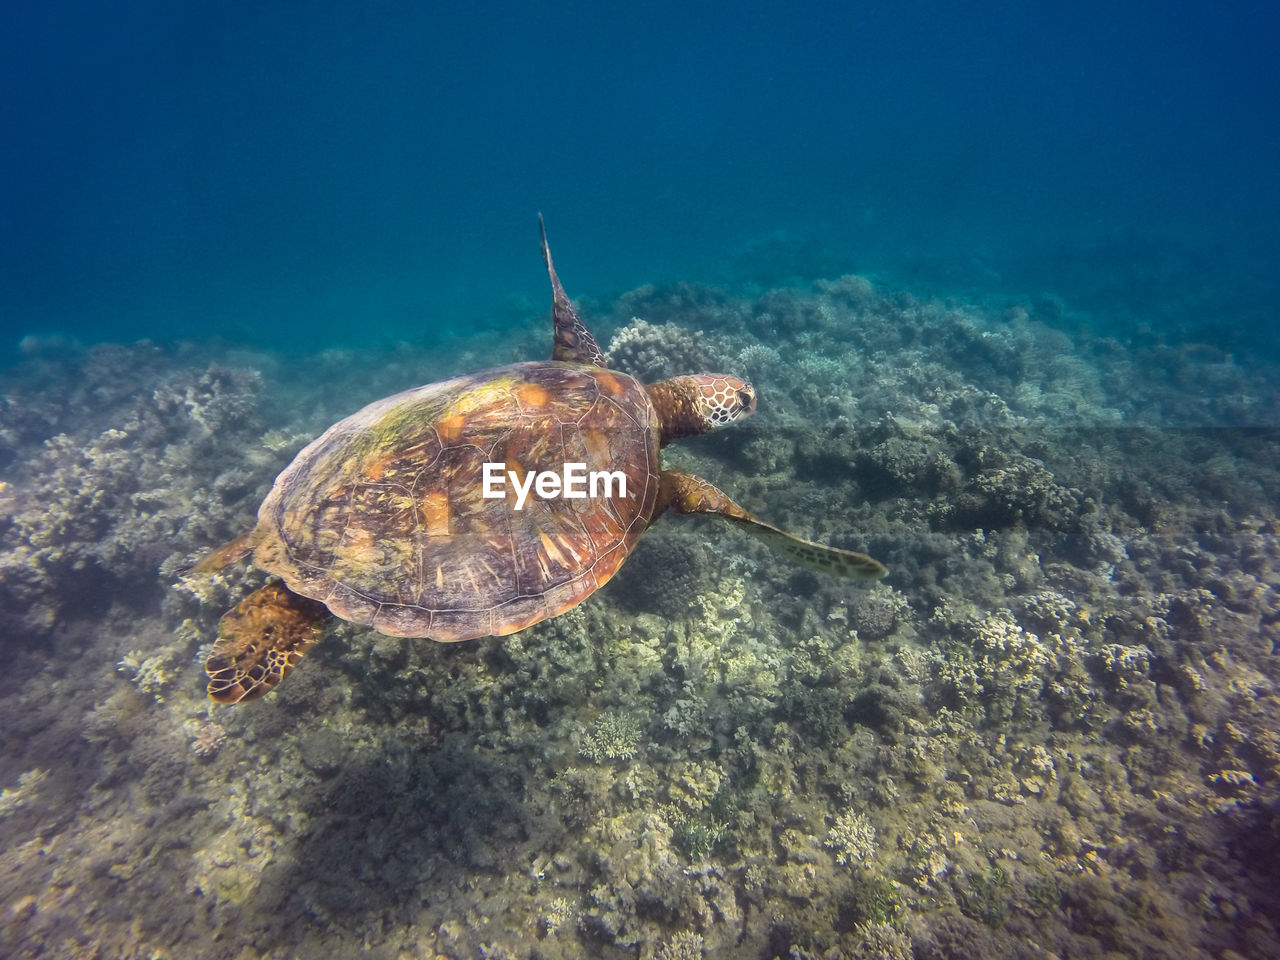 VIEW OF TURTLE IN SEA